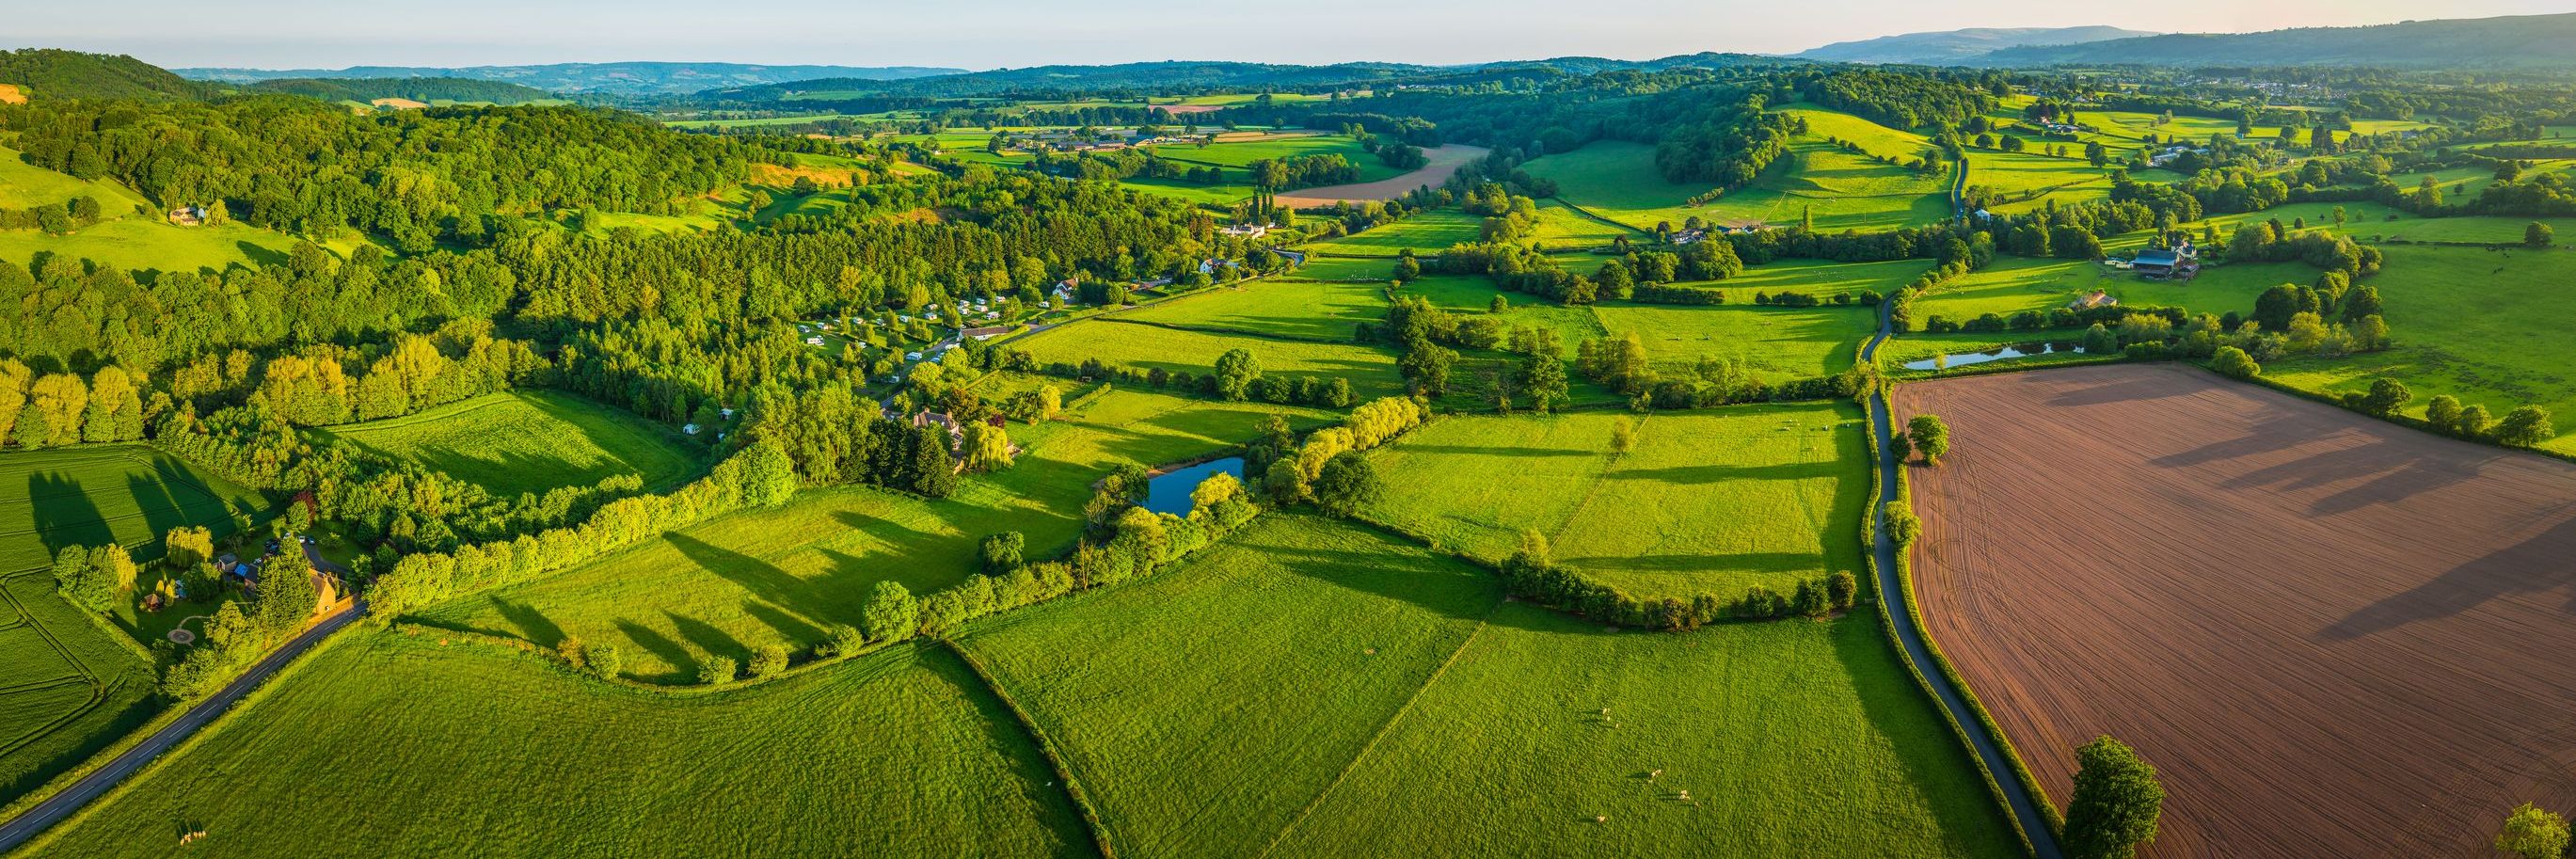 Wills & Tax Planning for Farmers & Landowners - The Latest Position